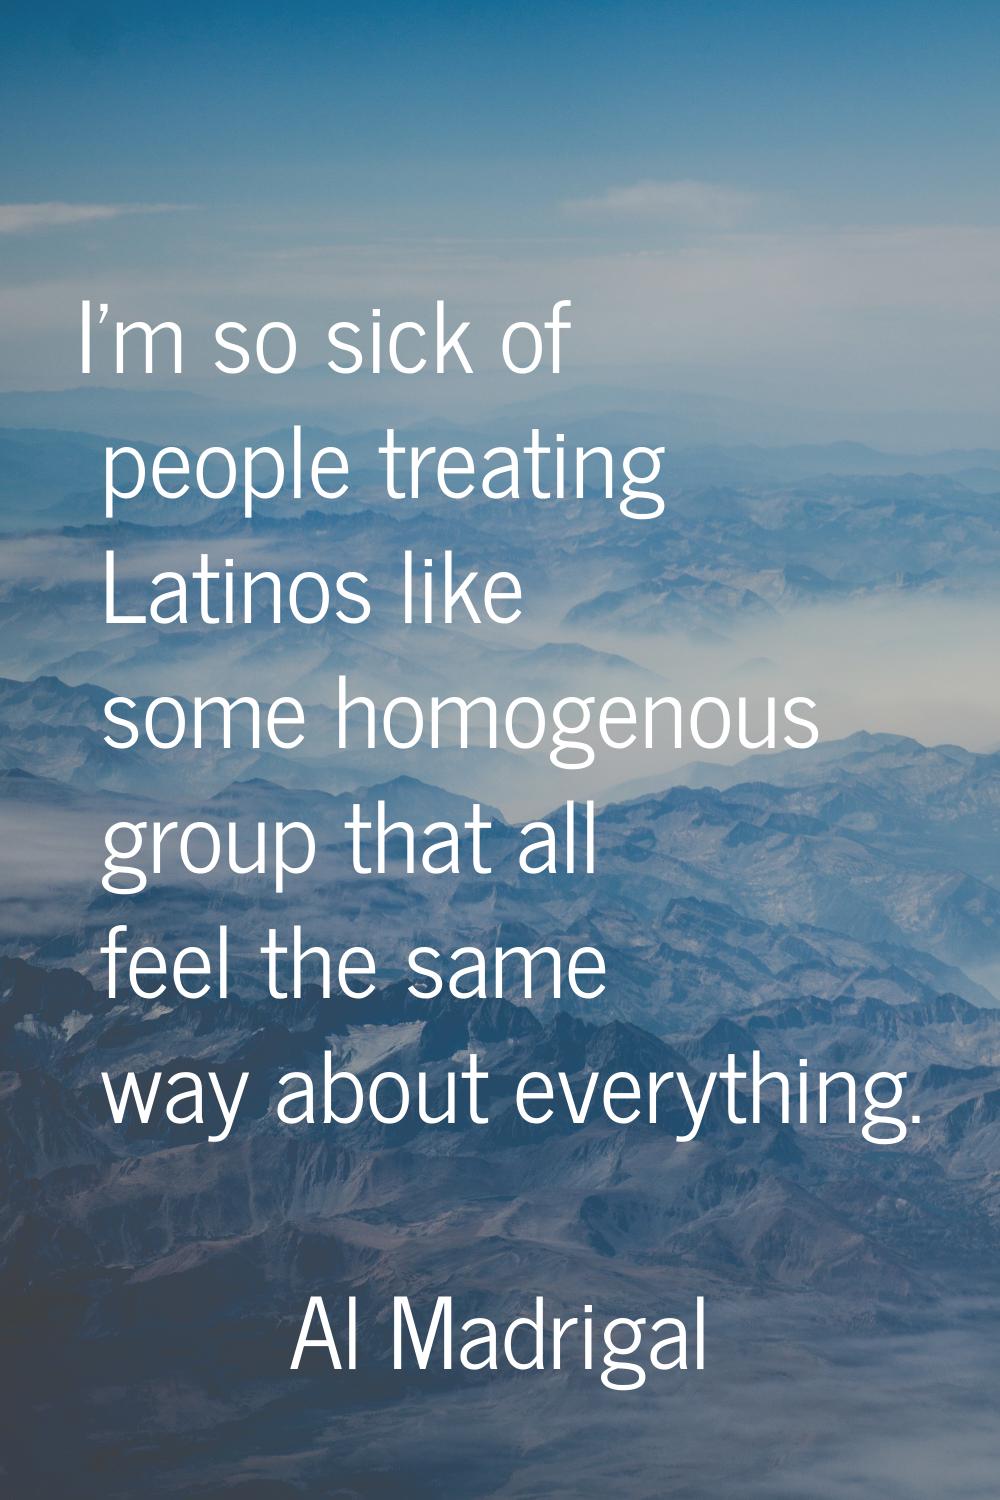 I'm so sick of people treating Latinos like some homogenous group that all feel the same way about 